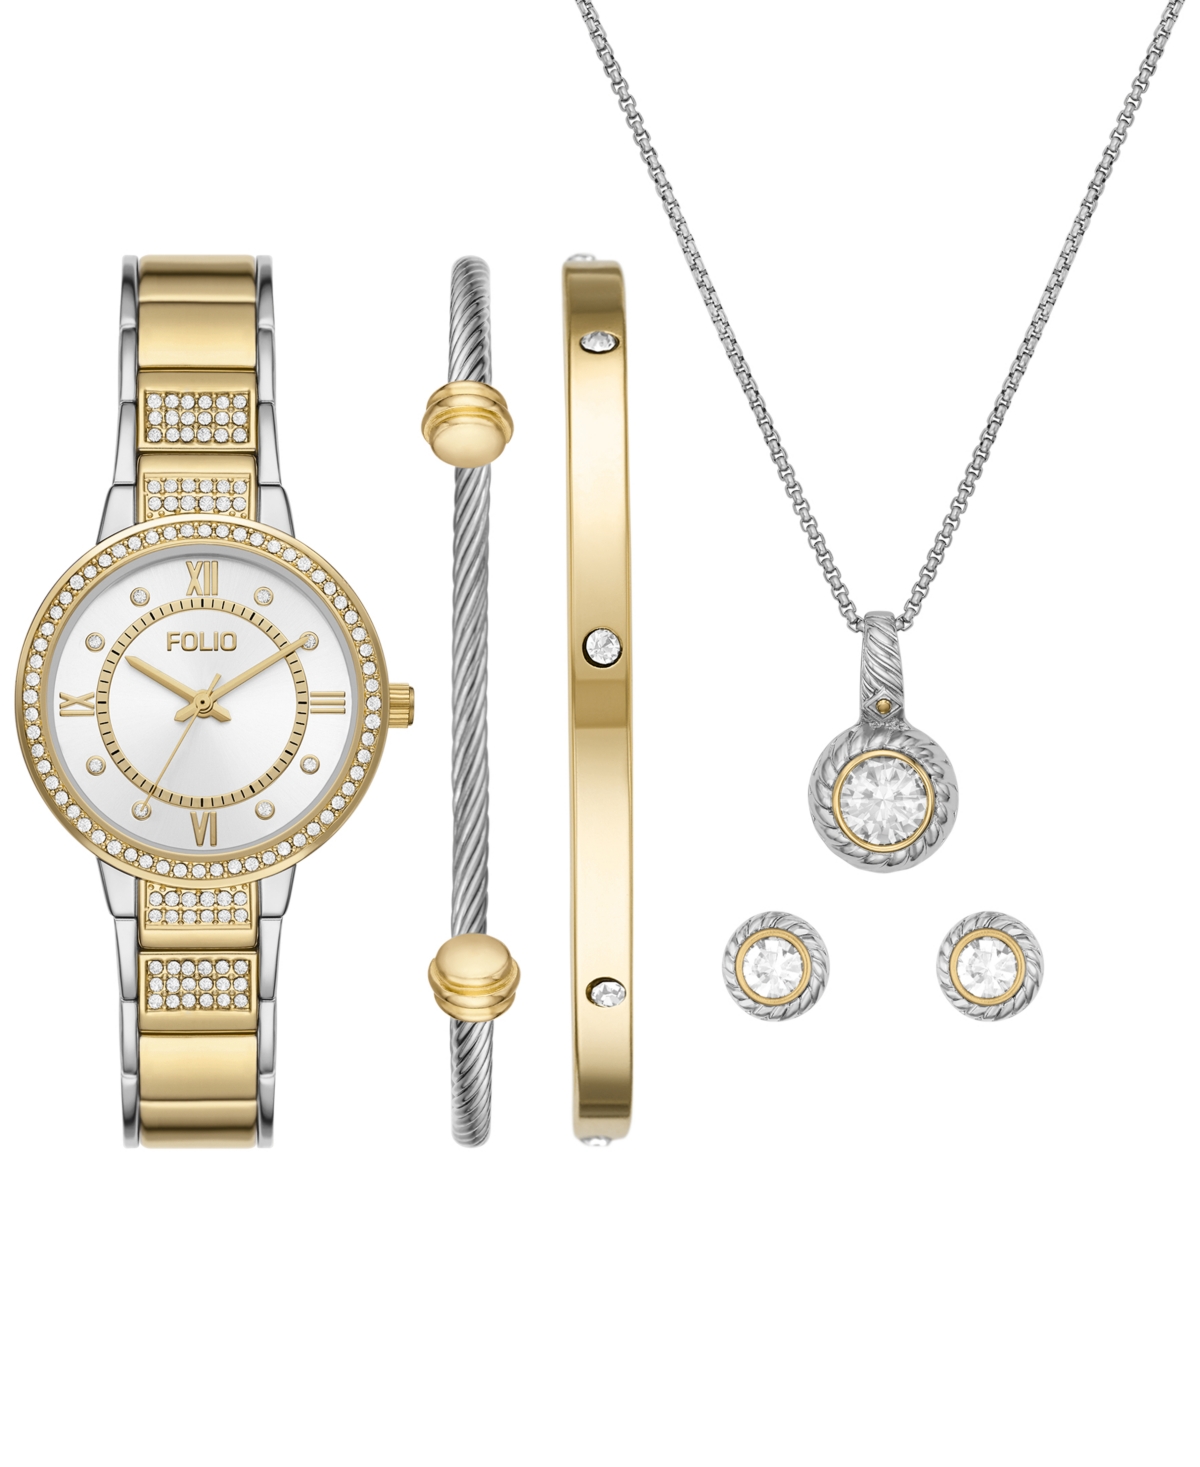 Folio Women's Three Hand Two-Tone 33mm Watch and Bracelet Gift Set, 6 Pieces